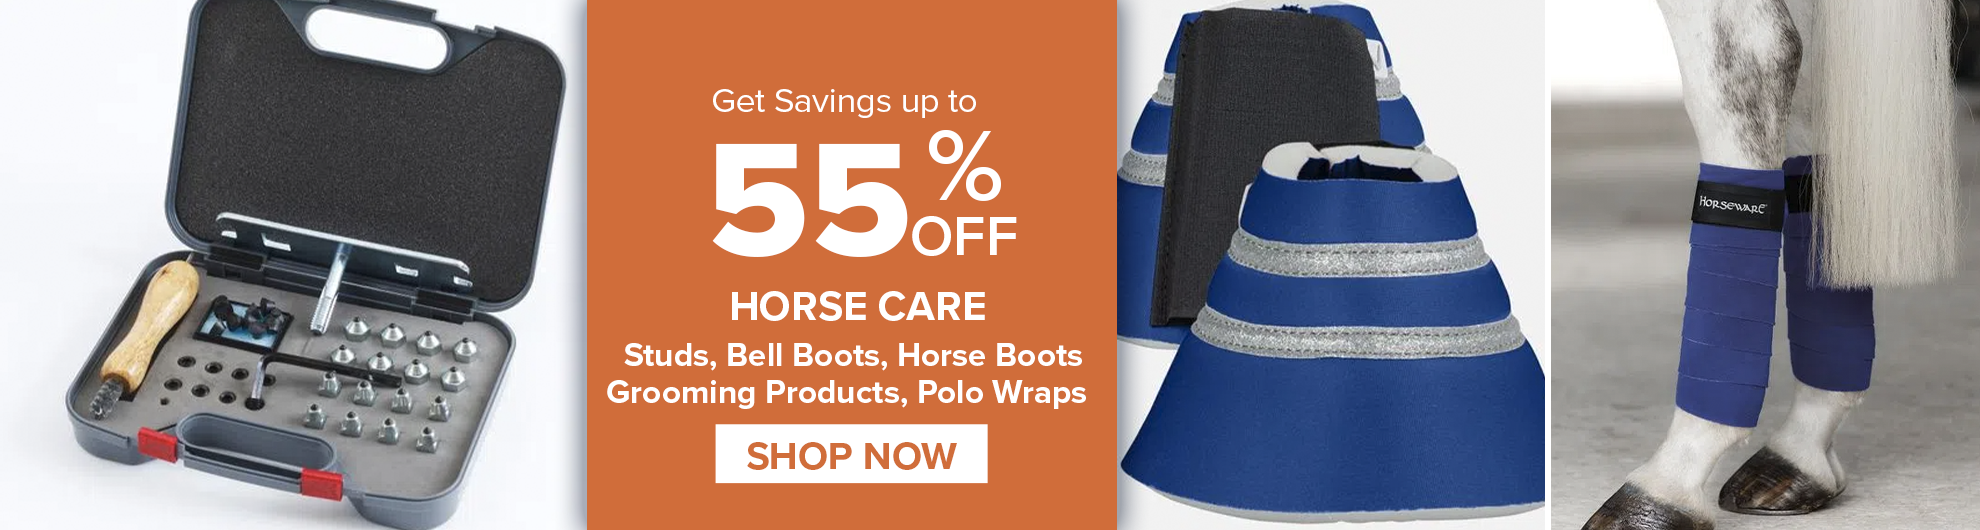 Horse Protection & Studs on Sale